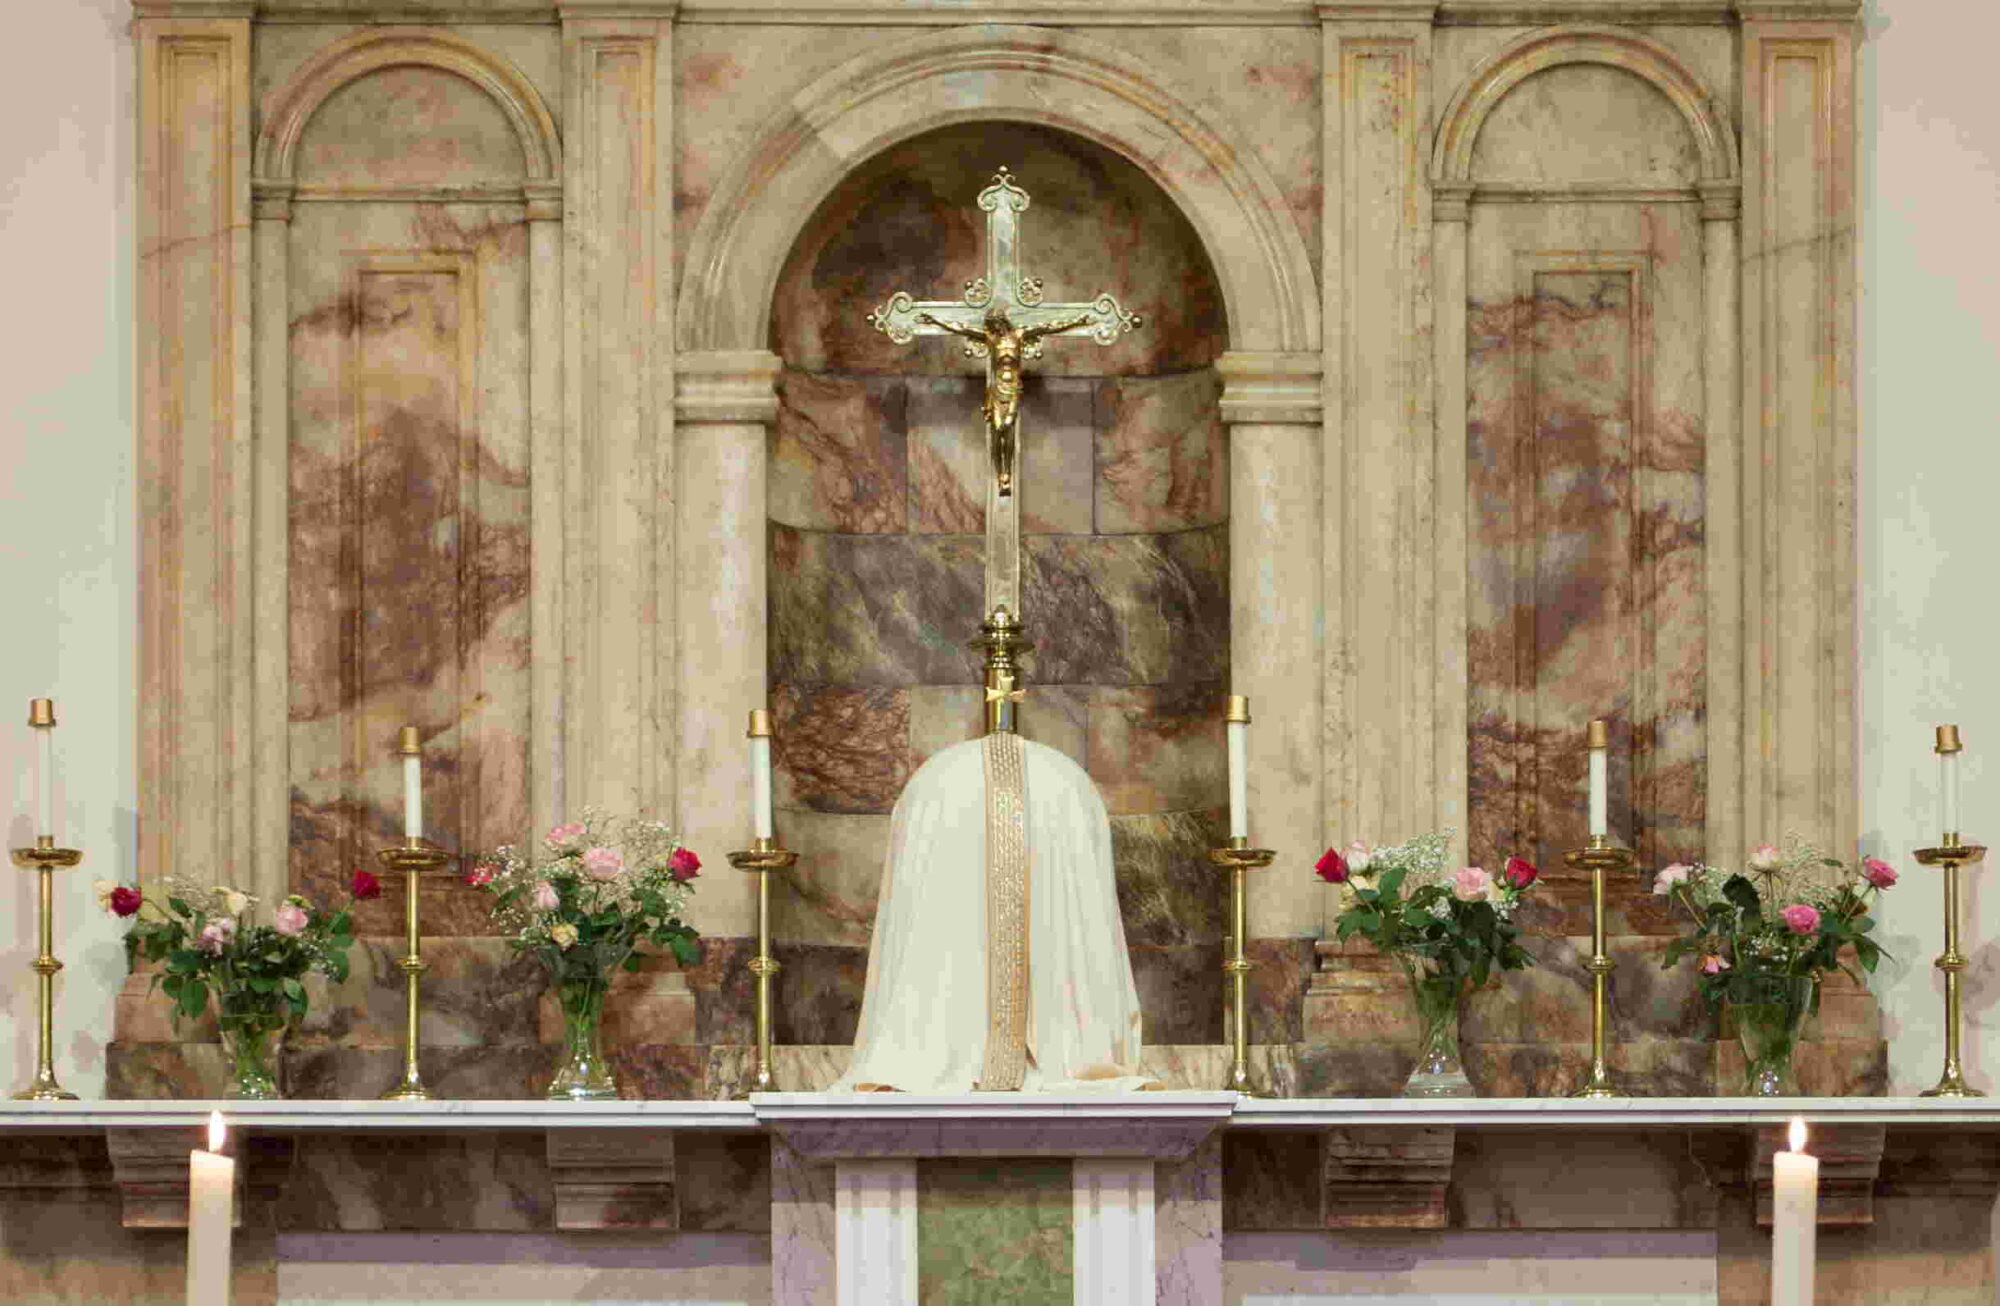 Tabernacle with cross above